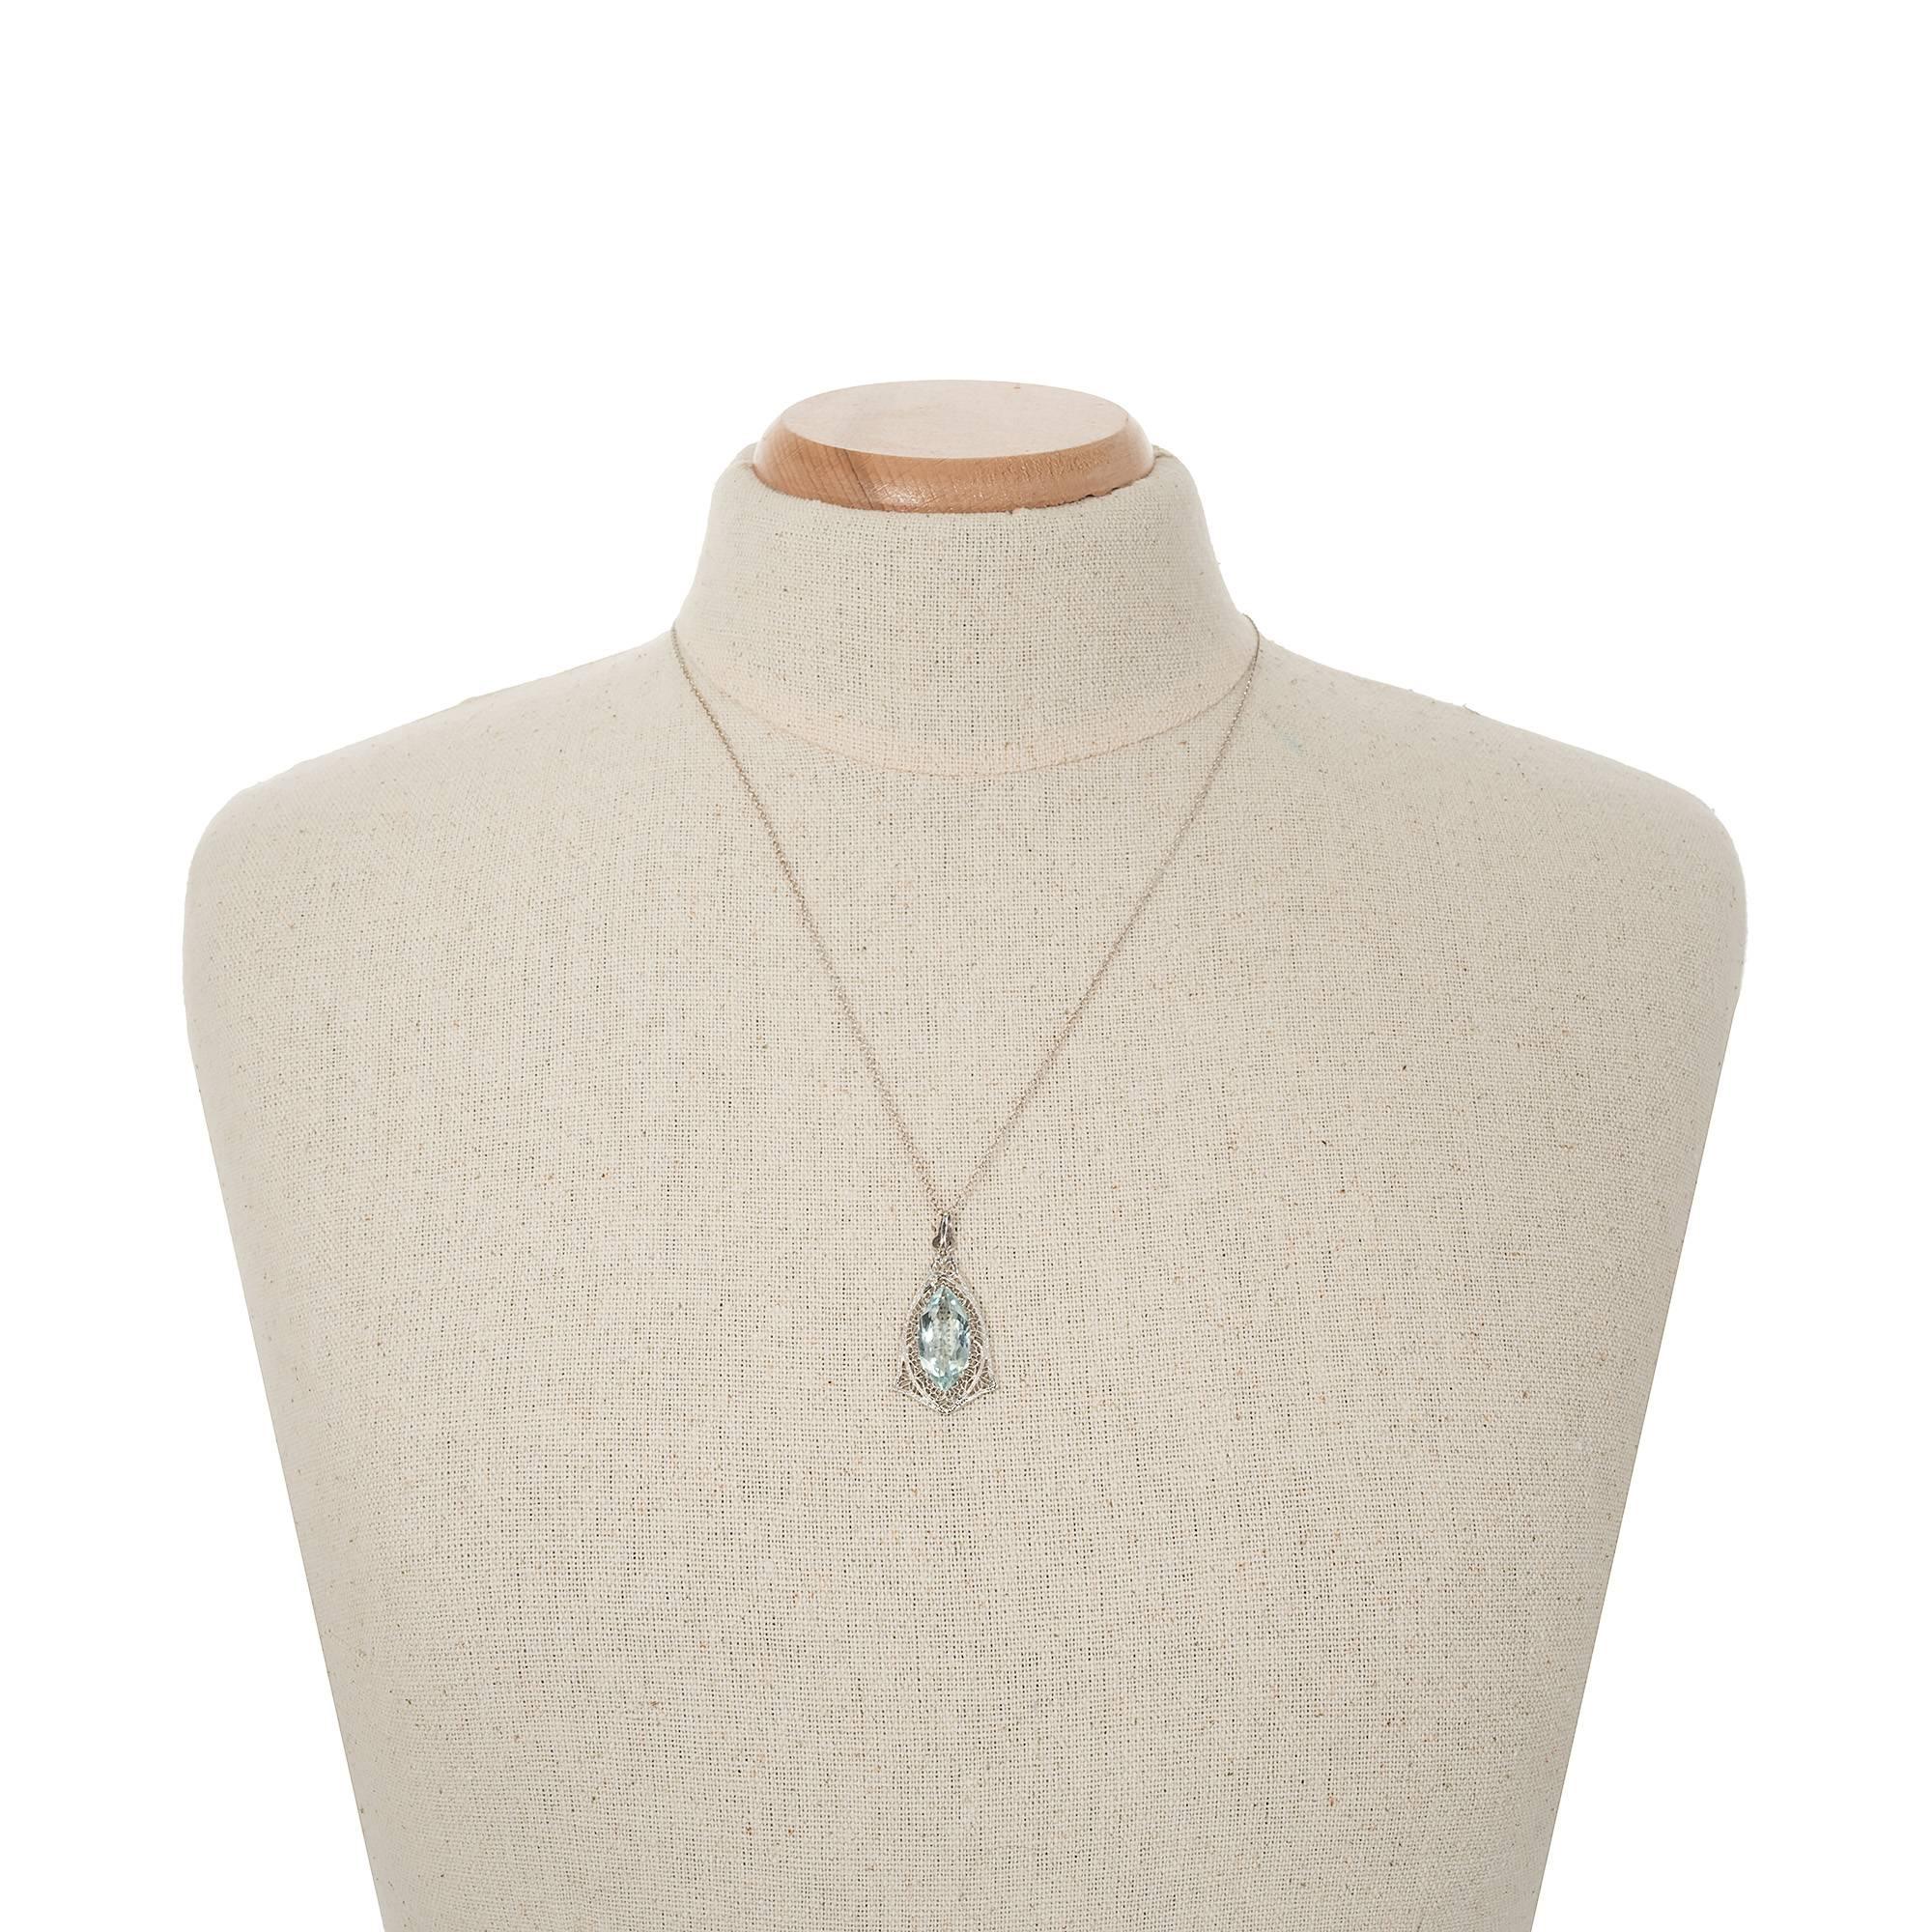 5.15 Carat Marquise Aqua Filigree White Gold Pendant Necklace In Good Condition For Sale In Stamford, CT